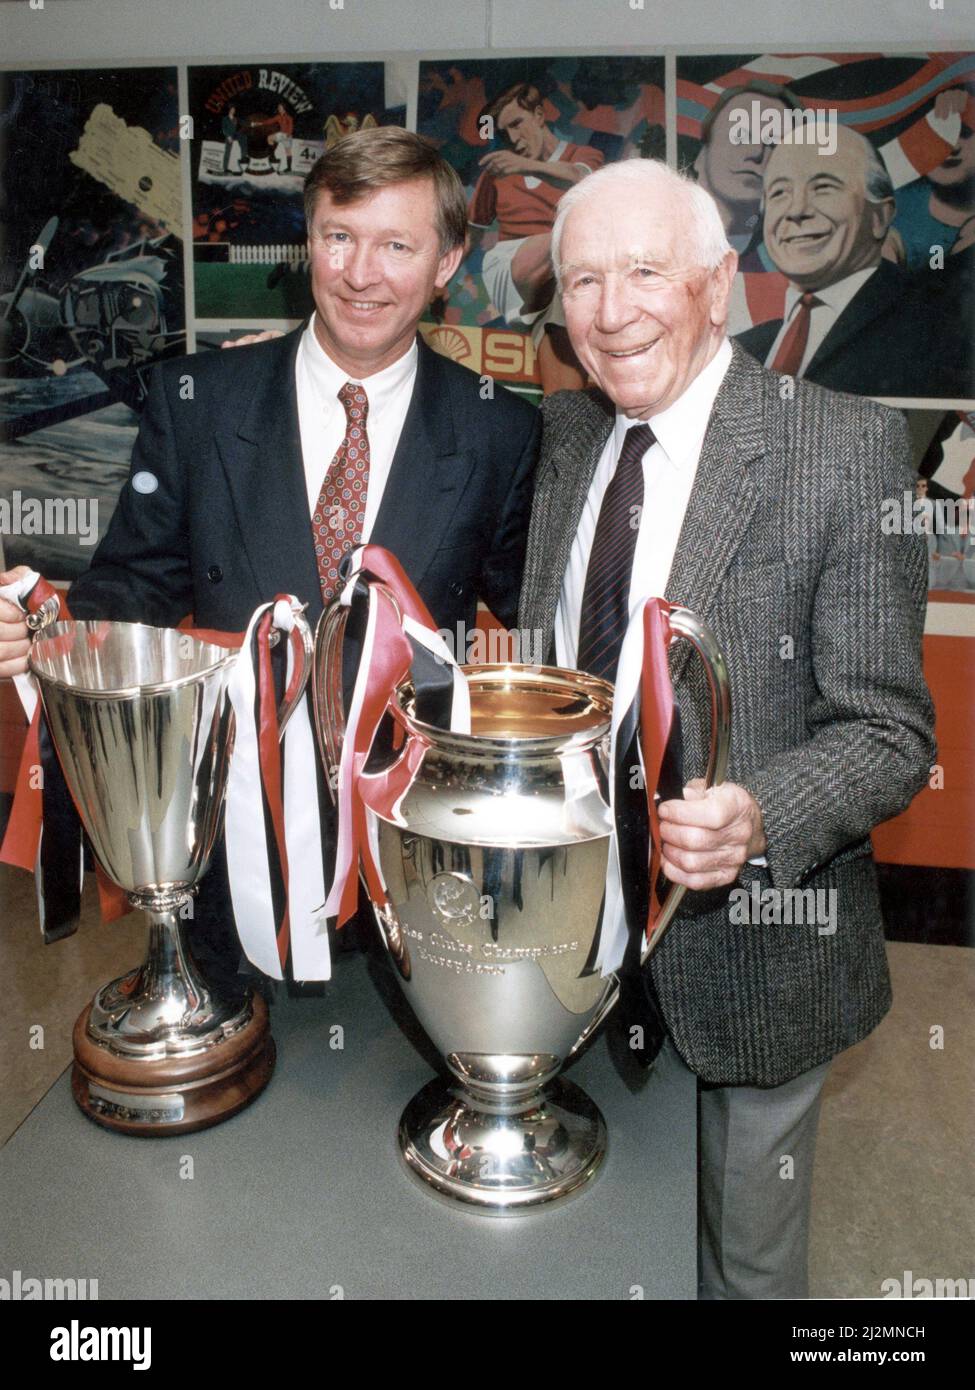 Manchester United manager Alex Ferguson and former manager Sir Matt Busby posing with the European trophies which they ech won as United manager. Ferguson won the Cup Winners Cup following his side's victory over Barcelona in May 1991 and Busby won the European Champions Cup trophy after his side defeated Benfica in the 1968 Final at Wembley. 18th October 1991. Stock Photo